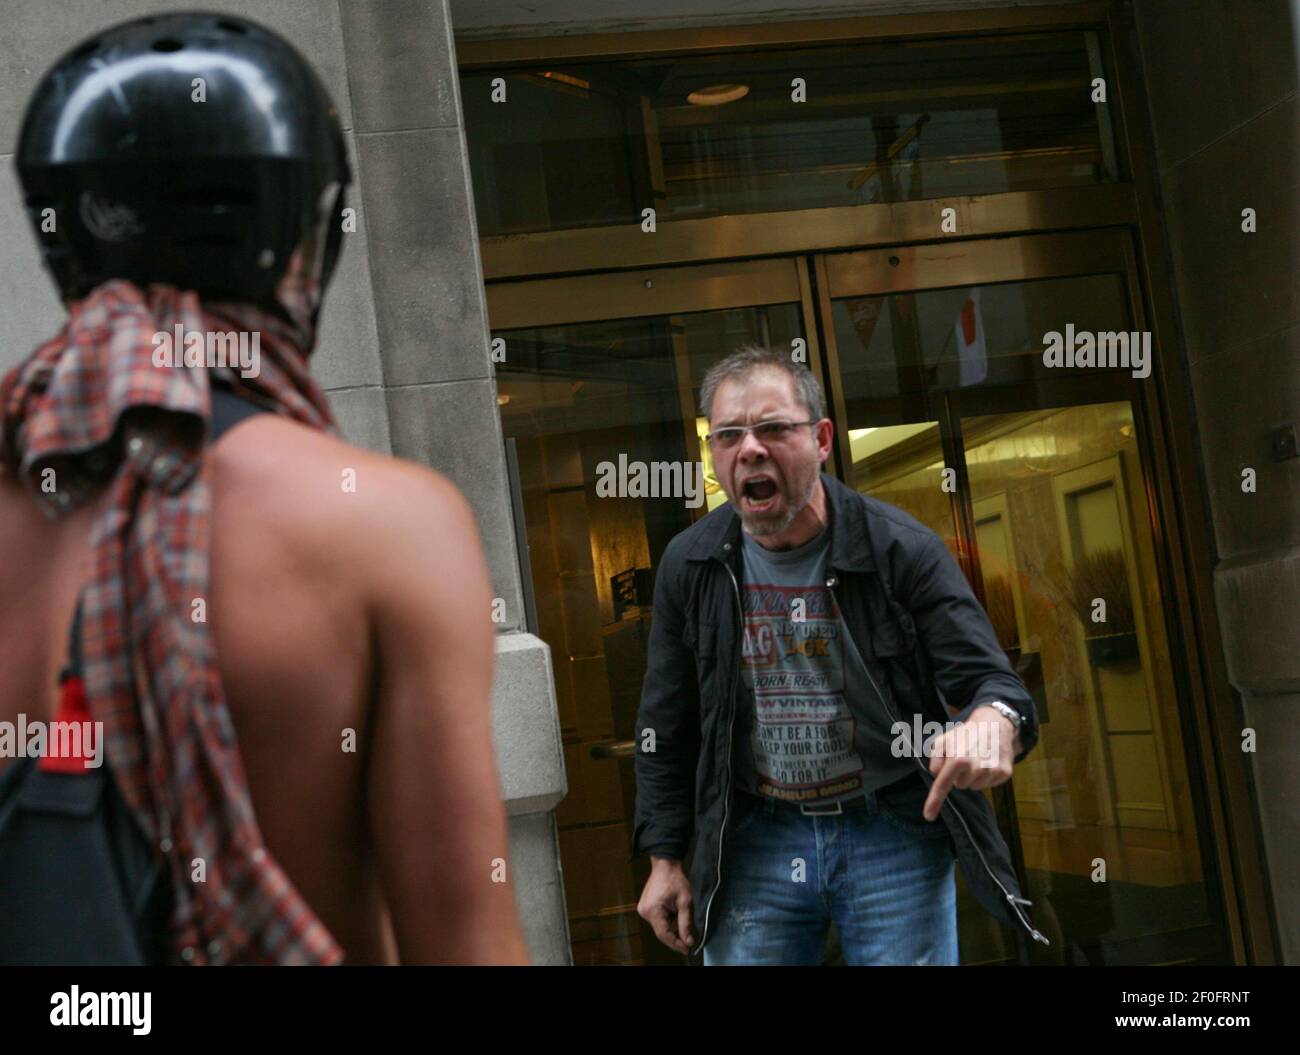 26 June 2010 - Toronto, Canada - Large groups of police dressed in riot gear starting taking control of downtown streets confronting protesters who have been marching through the streets against the G8 and G20 Summits. A local resident is seen here yelling at a protester for causing trouble during the summits. Photo Credit: Gary Fabiano/Sipa Press/G20Protest.005/1006270112 Stock Photo